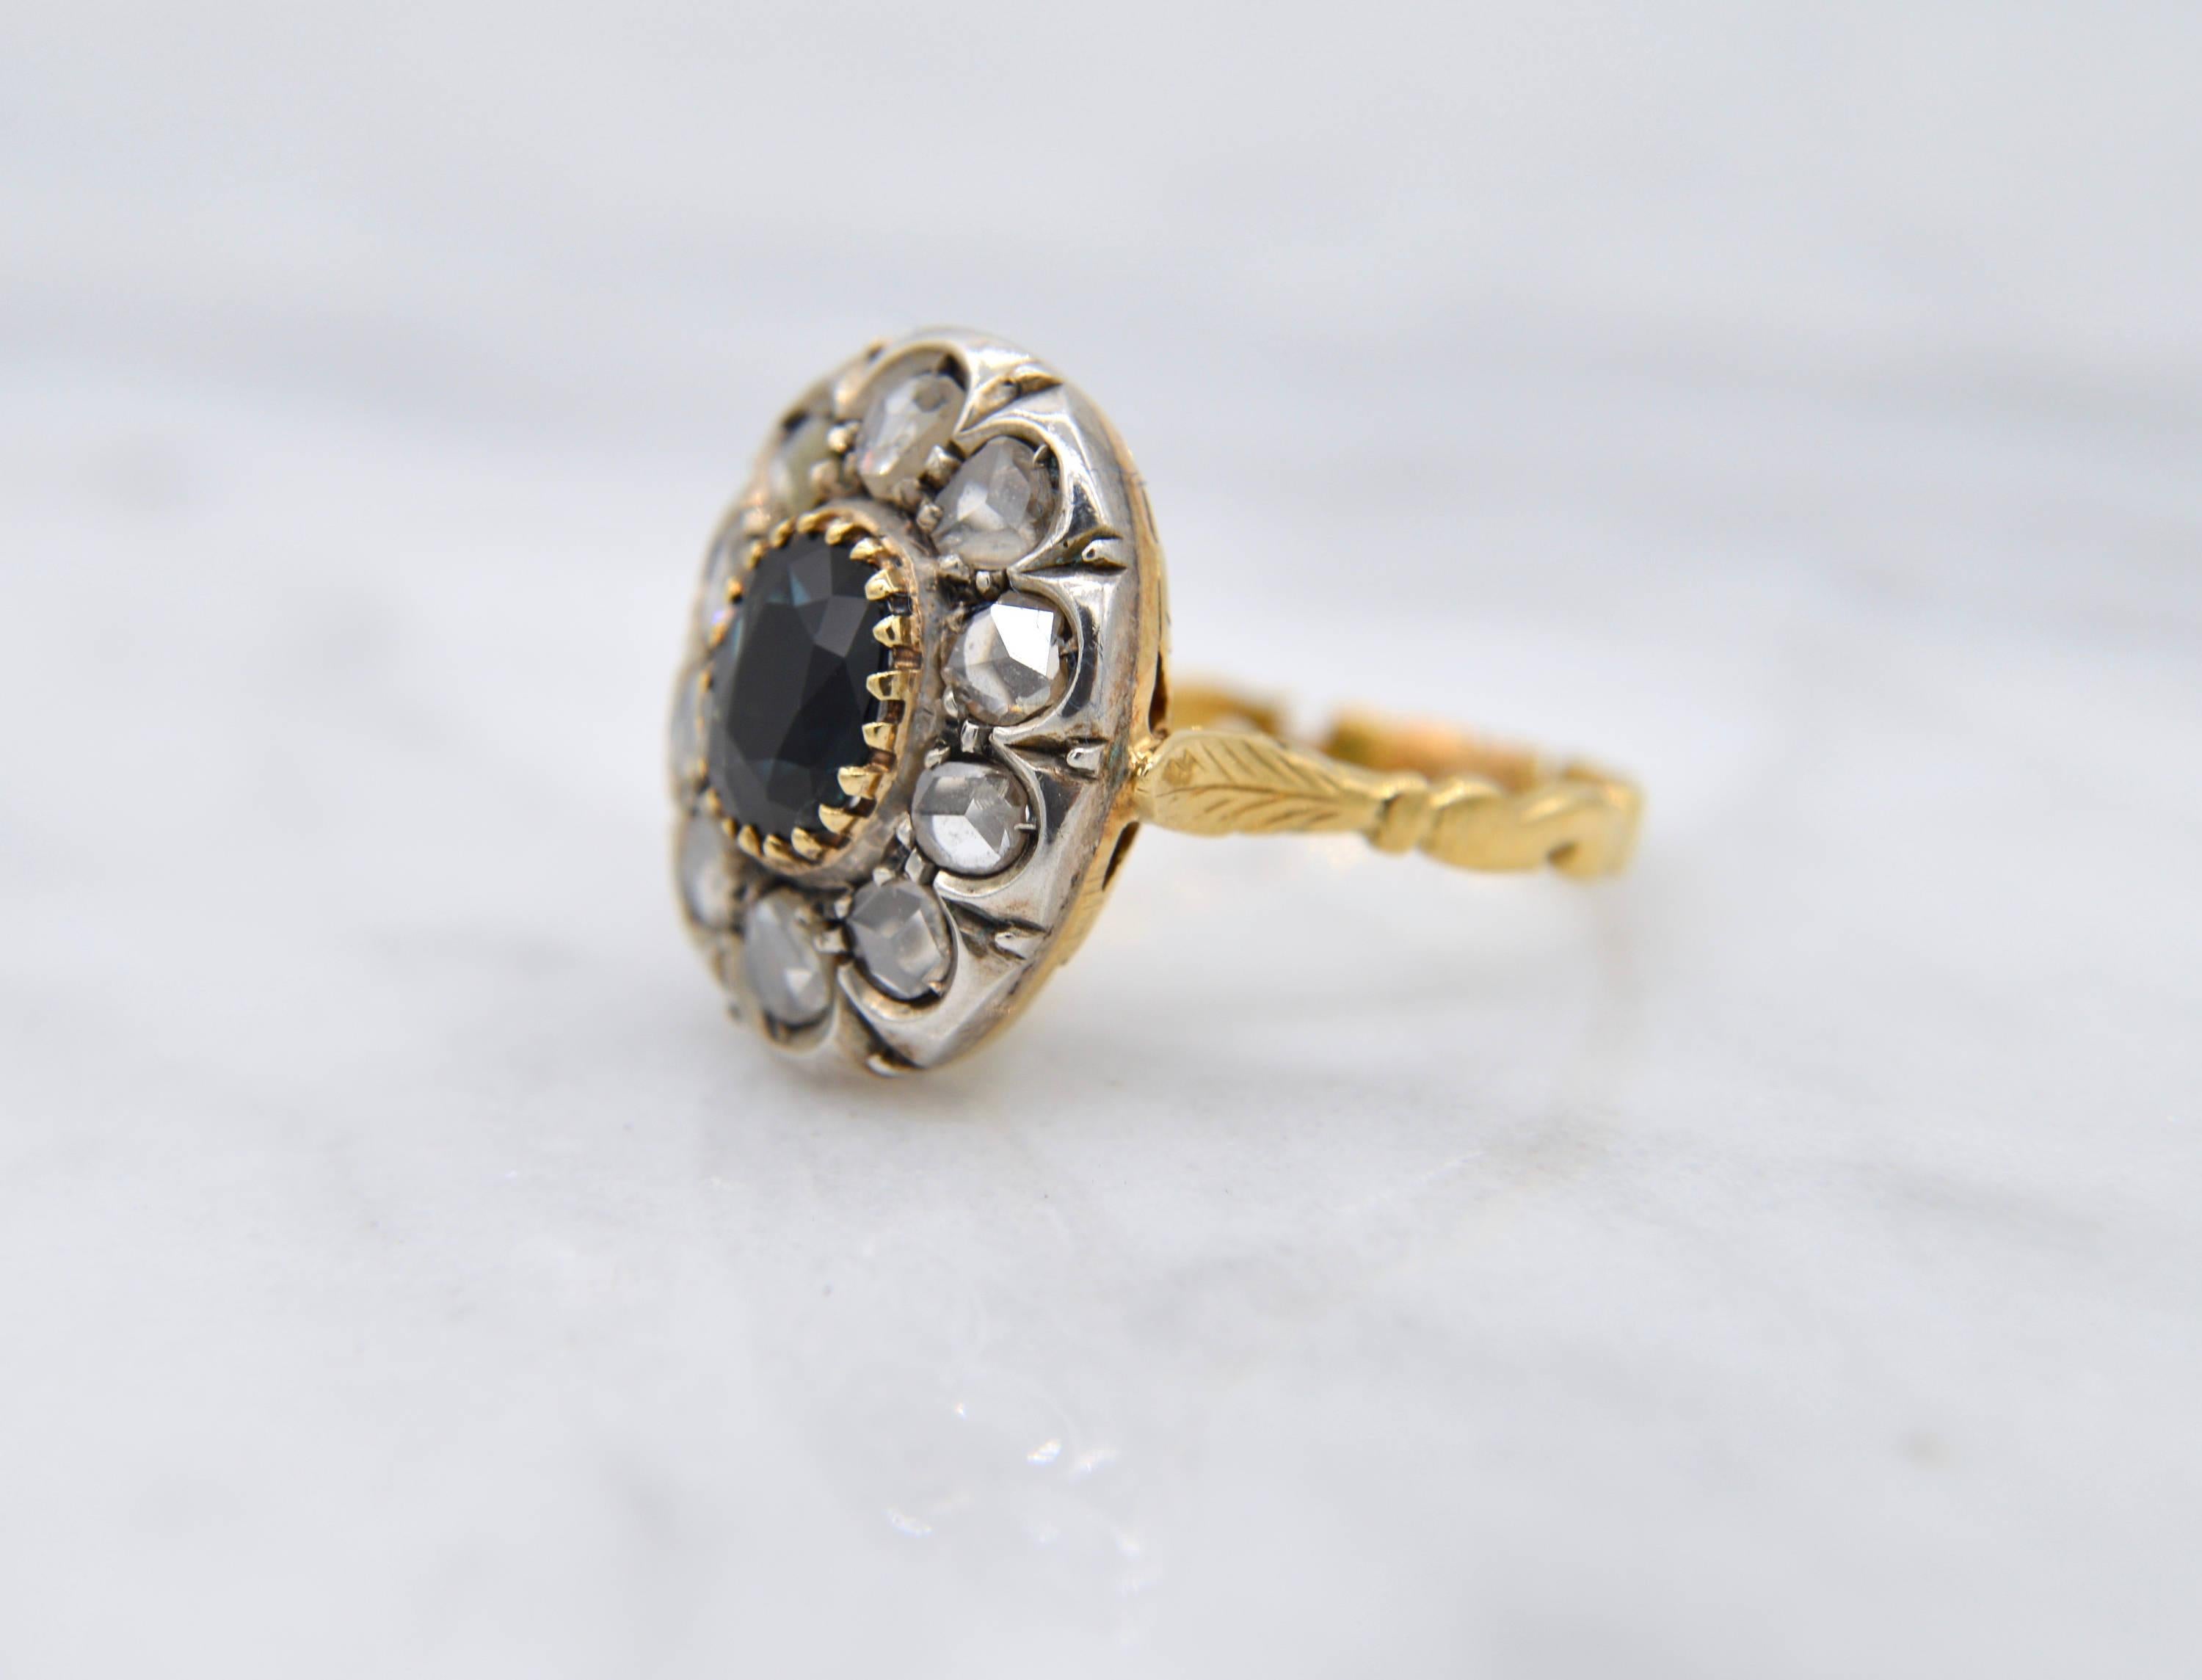 Gorgeous antique Edwardian era circa 1905-1910 2.3 carat natural genuine sapphire surrounded by 10 gorgeous sparking rosecut genuine diamonds that measure 3mm (.11 carat) each. 18K yellow gold shank with silver setting. Marked as 750 for solid 18K.